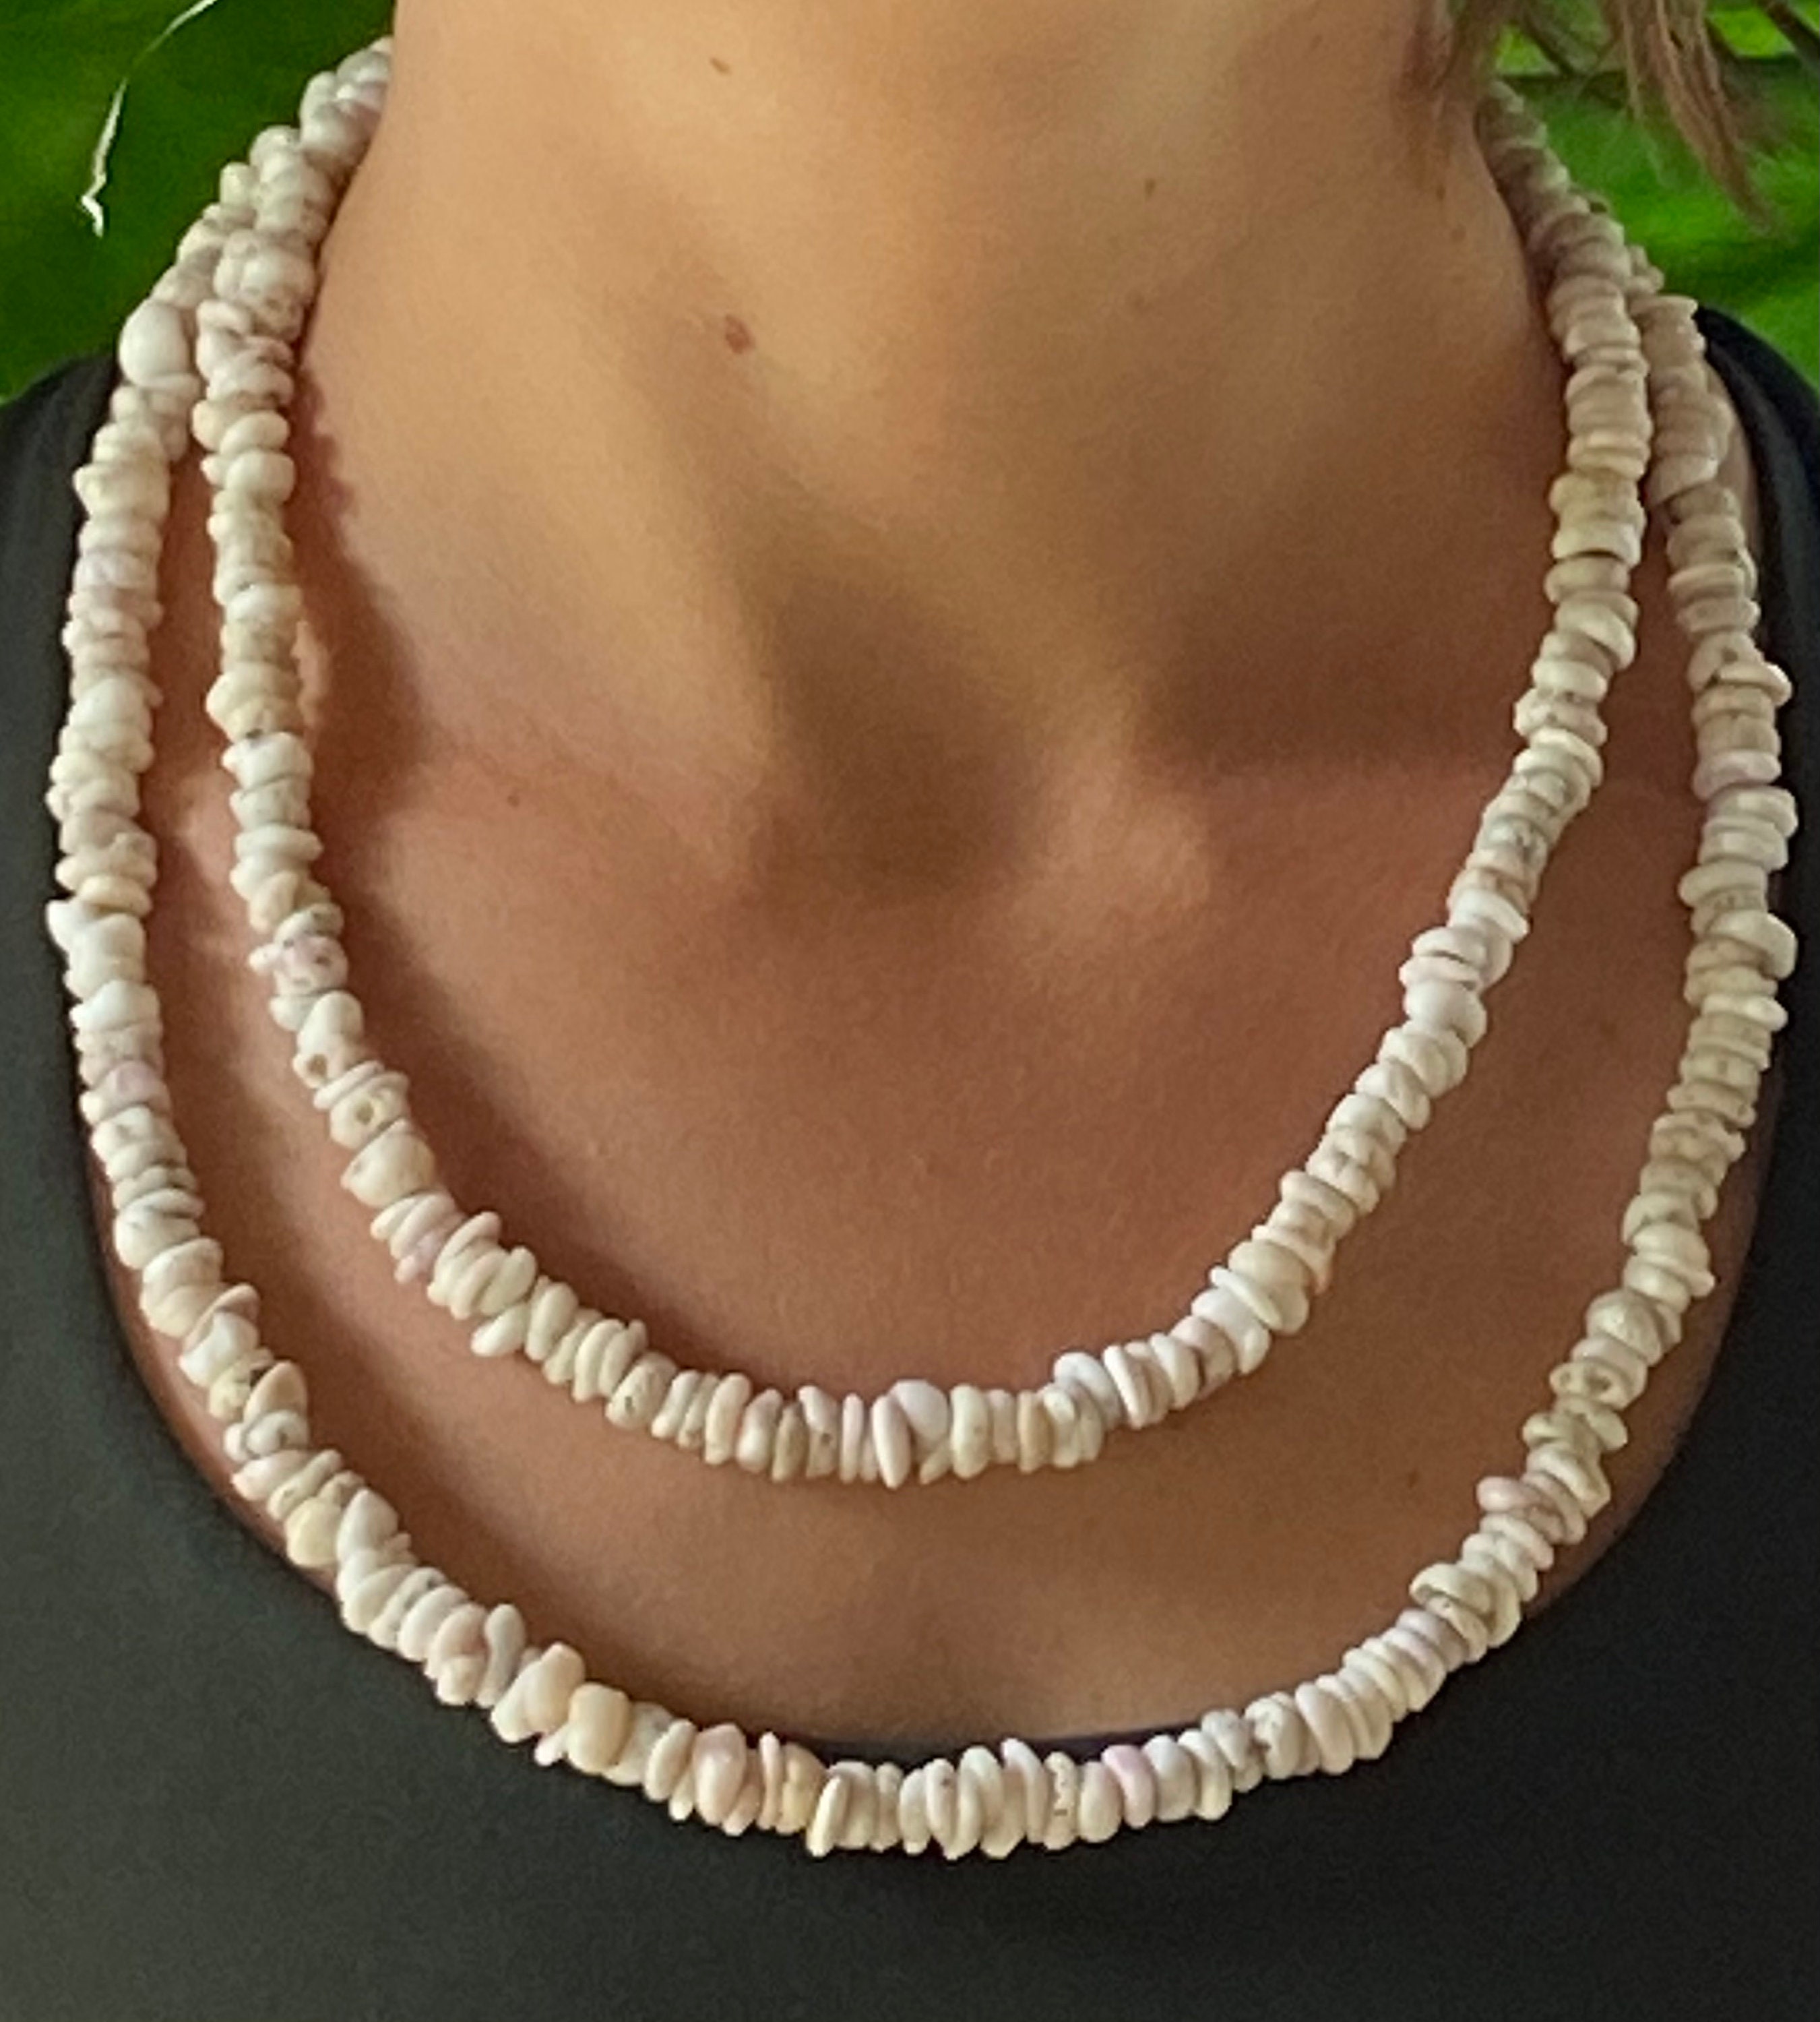 Puka Shell Necklaces | White Shell Necklace Men | Puka Shell Necklace Men -  New Fashion - Aliexpress